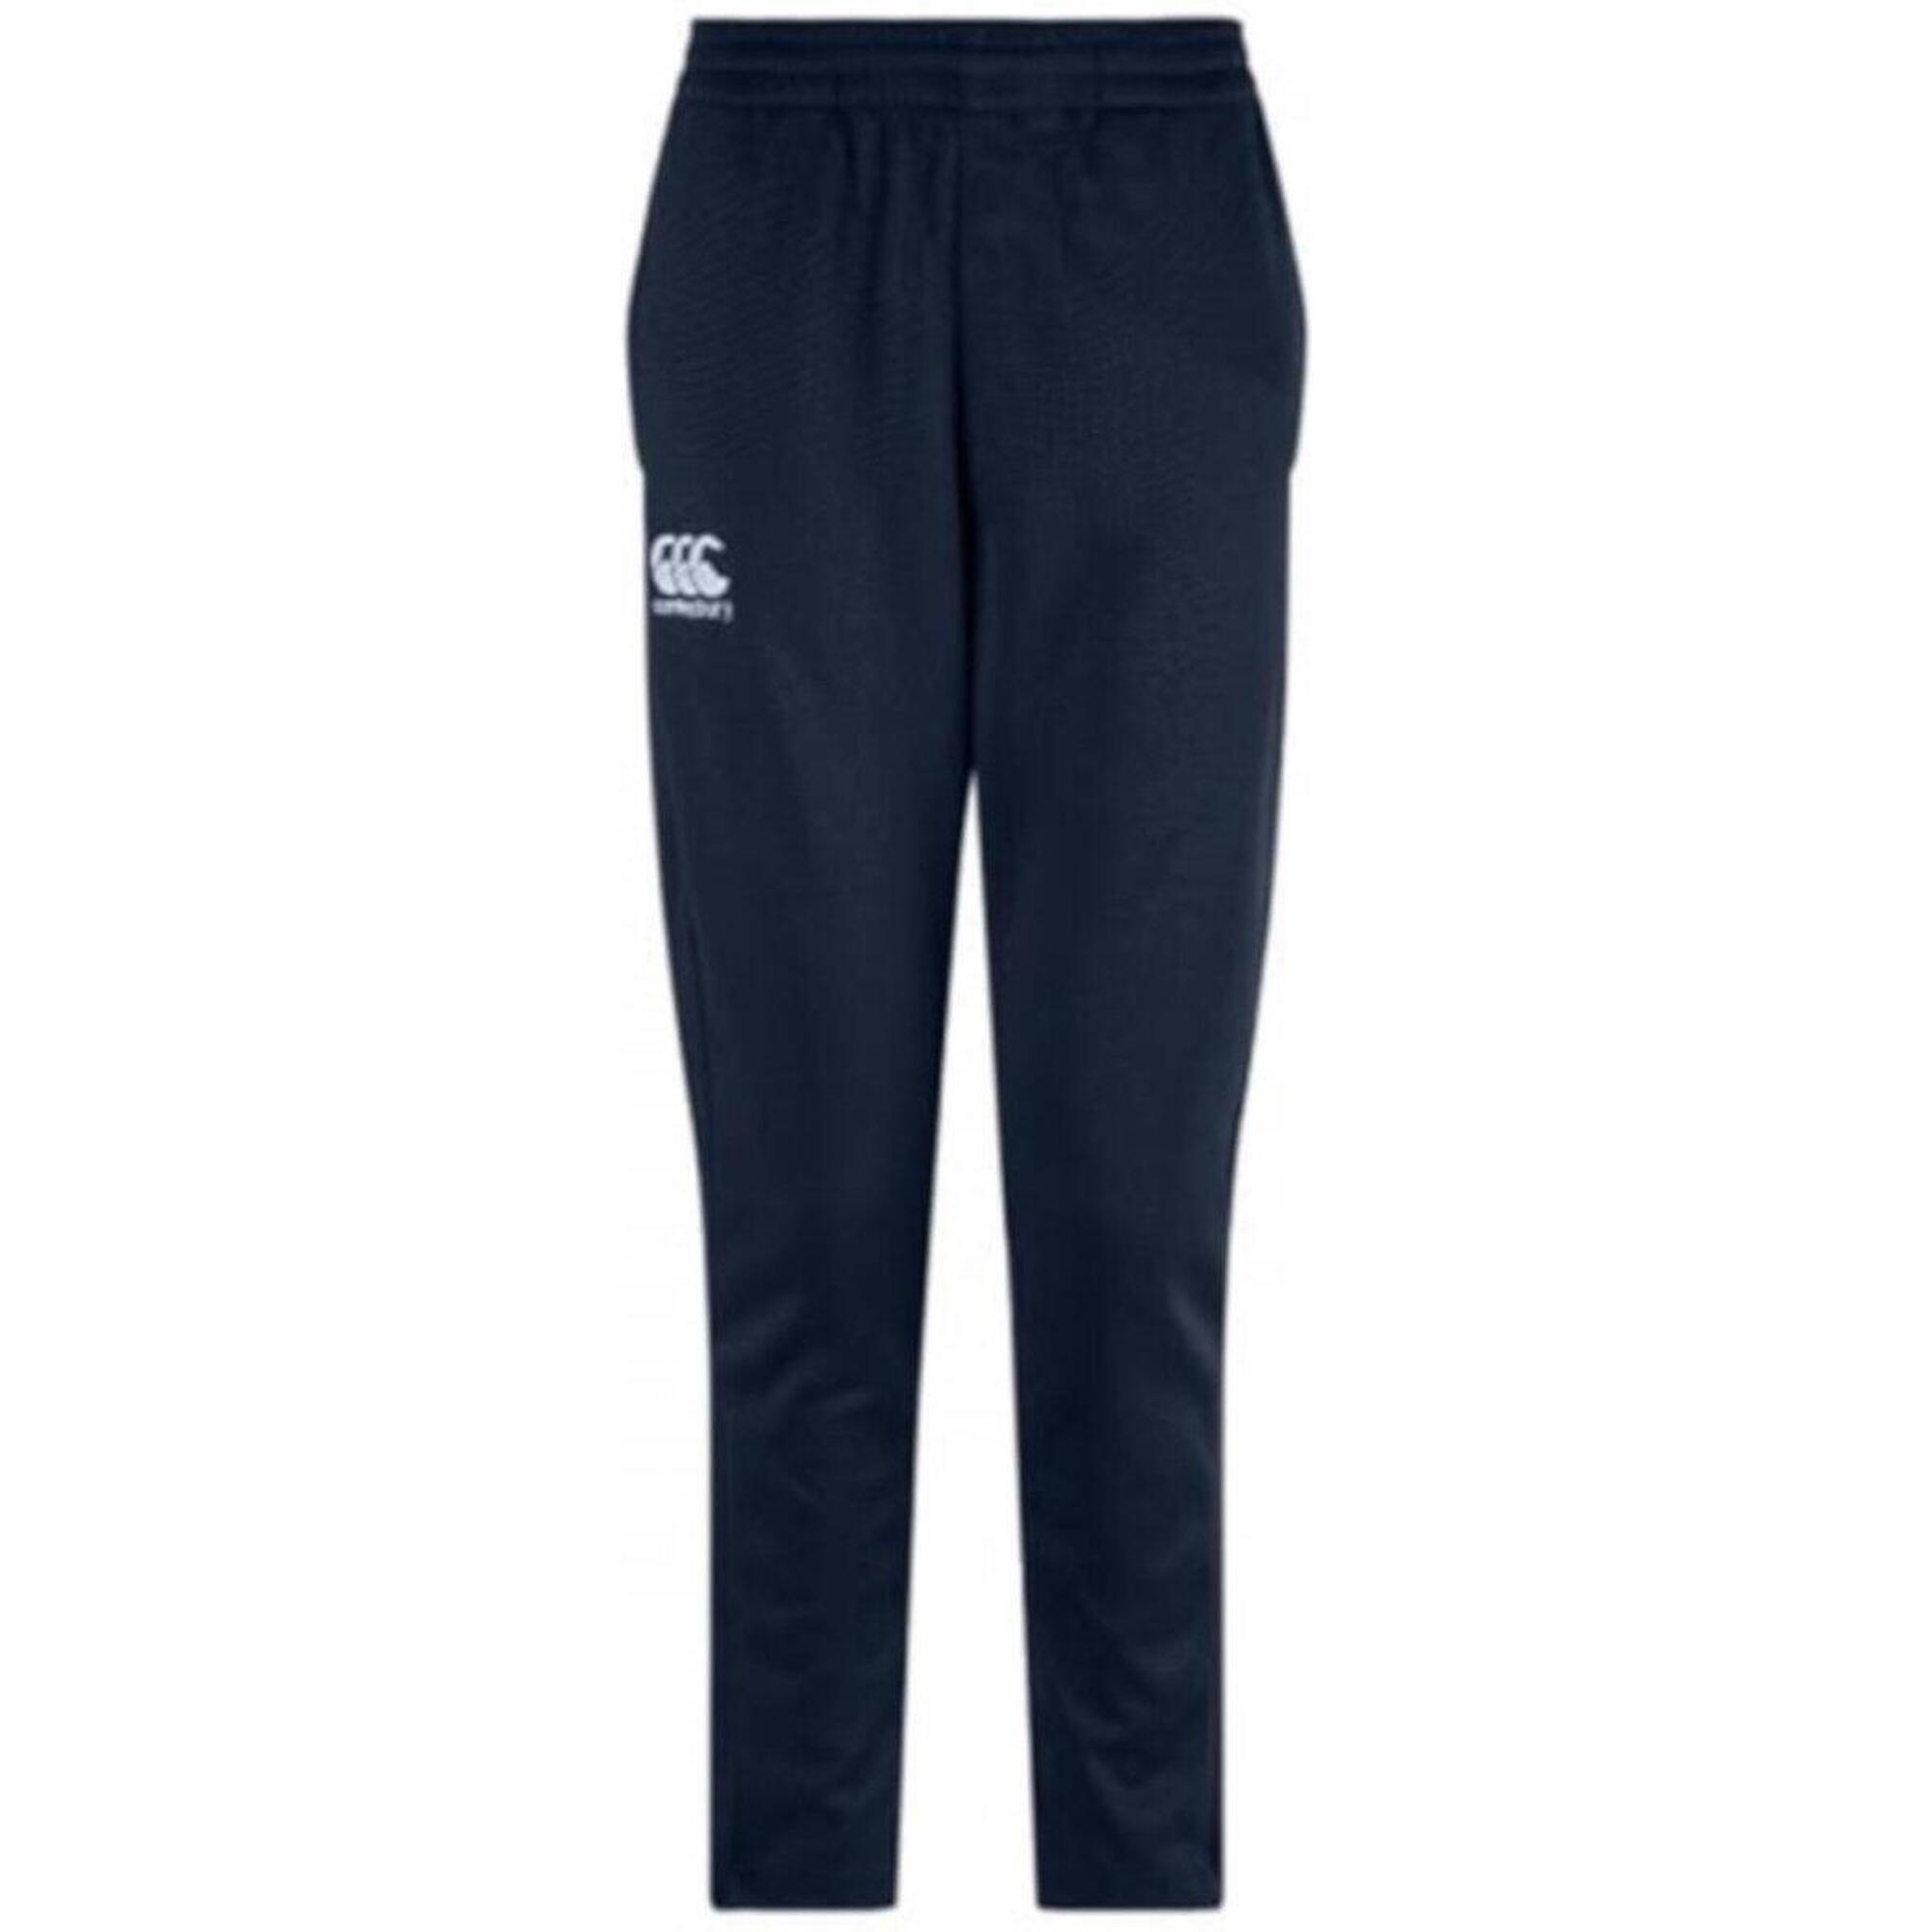 CANTERBURY STRETCH TAPERED PANT JUNIOR, NAVY 1/4